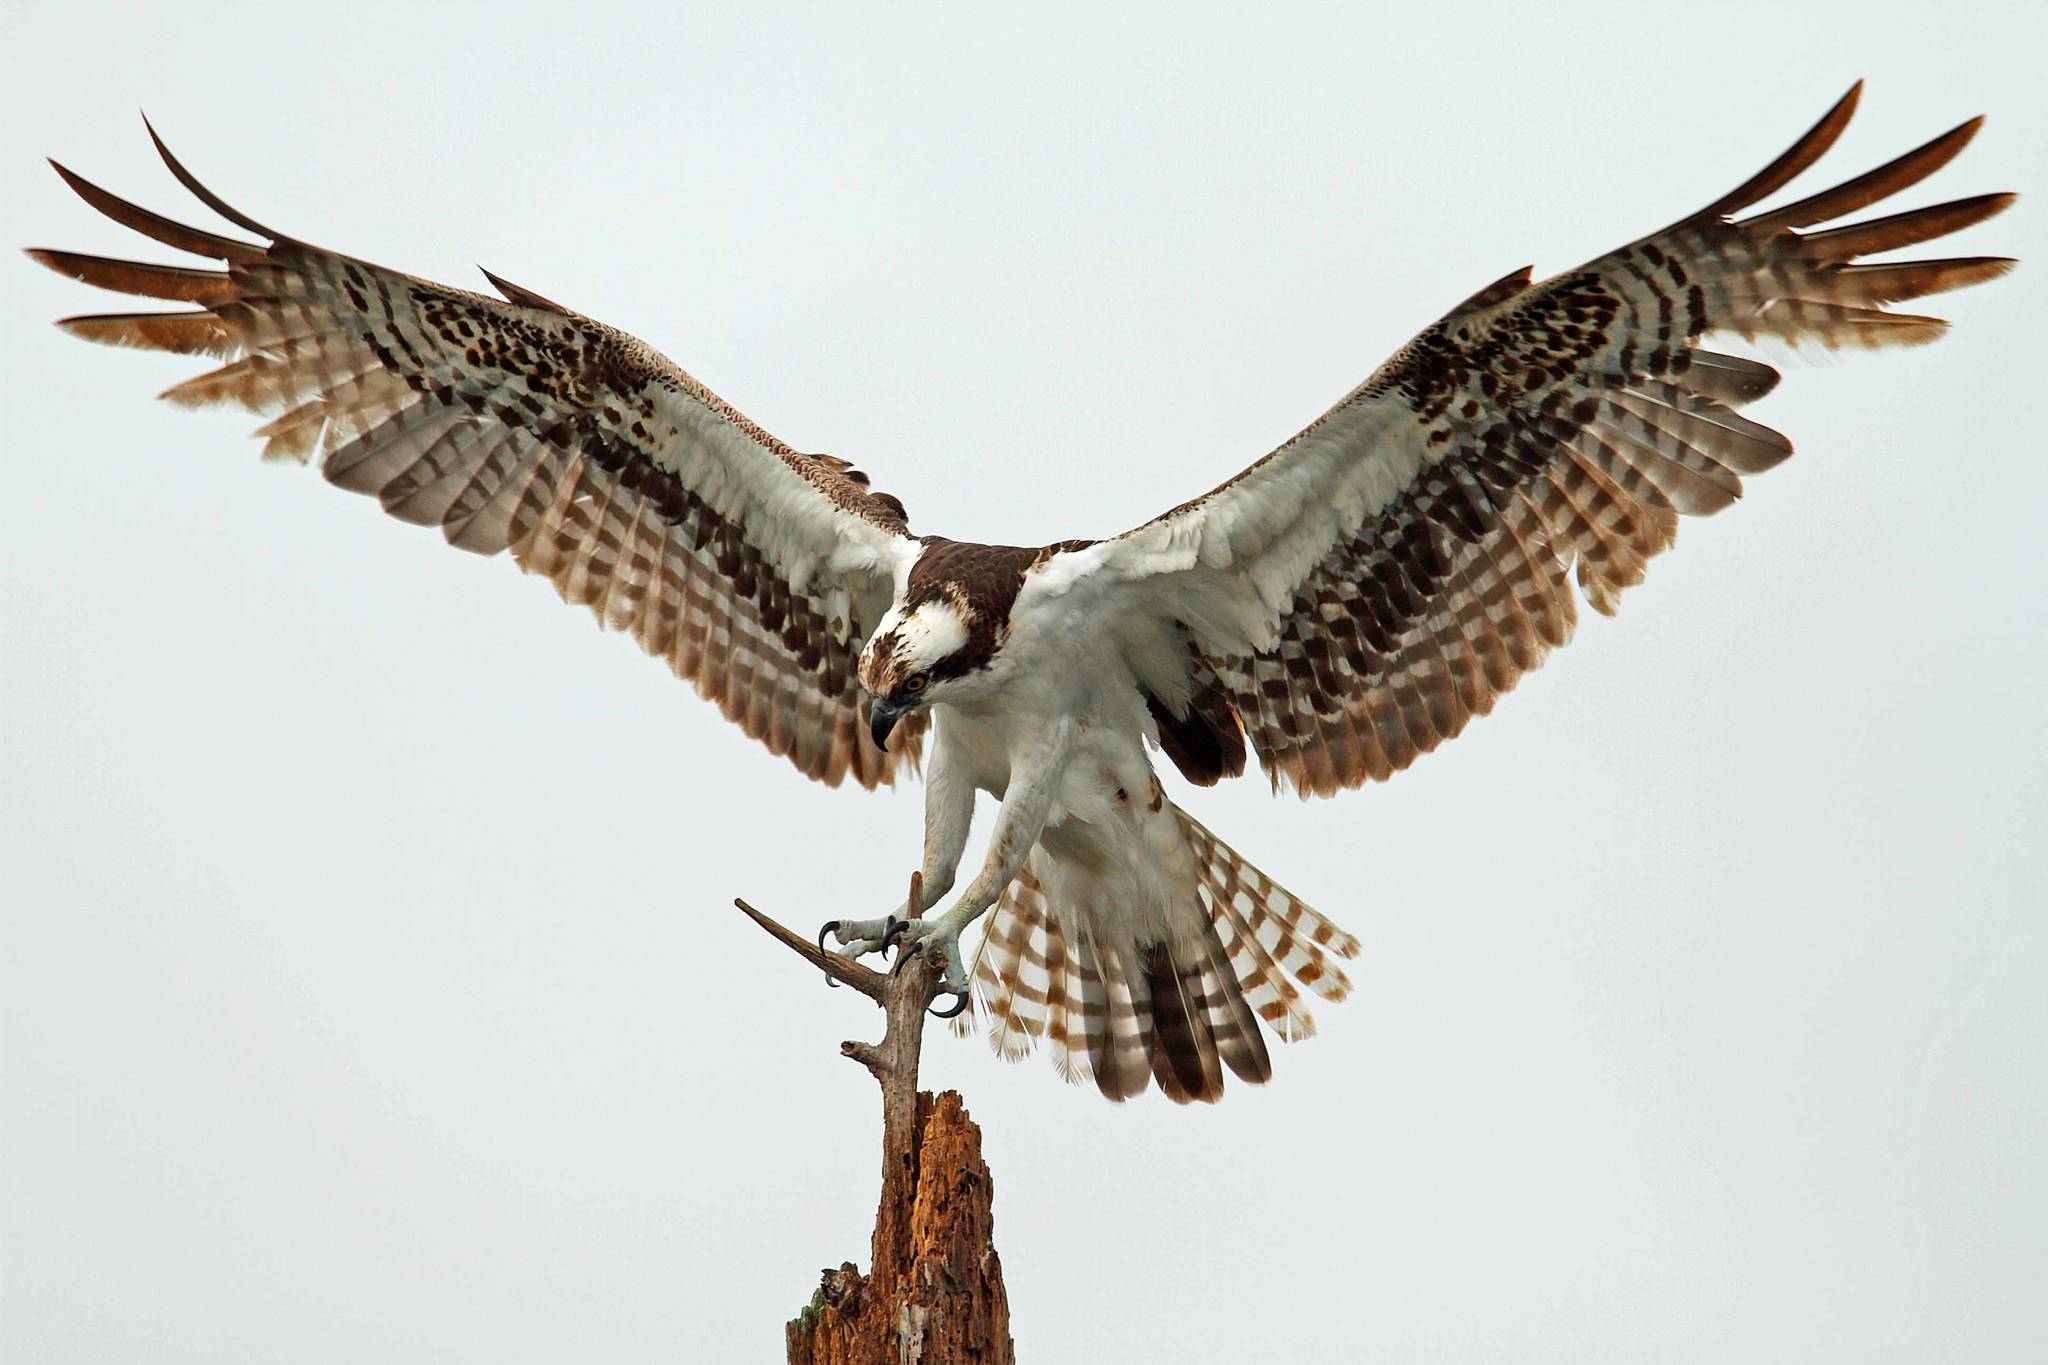 Photographer Paul Lischeid captured this image of an osprey on Whidbey Island.